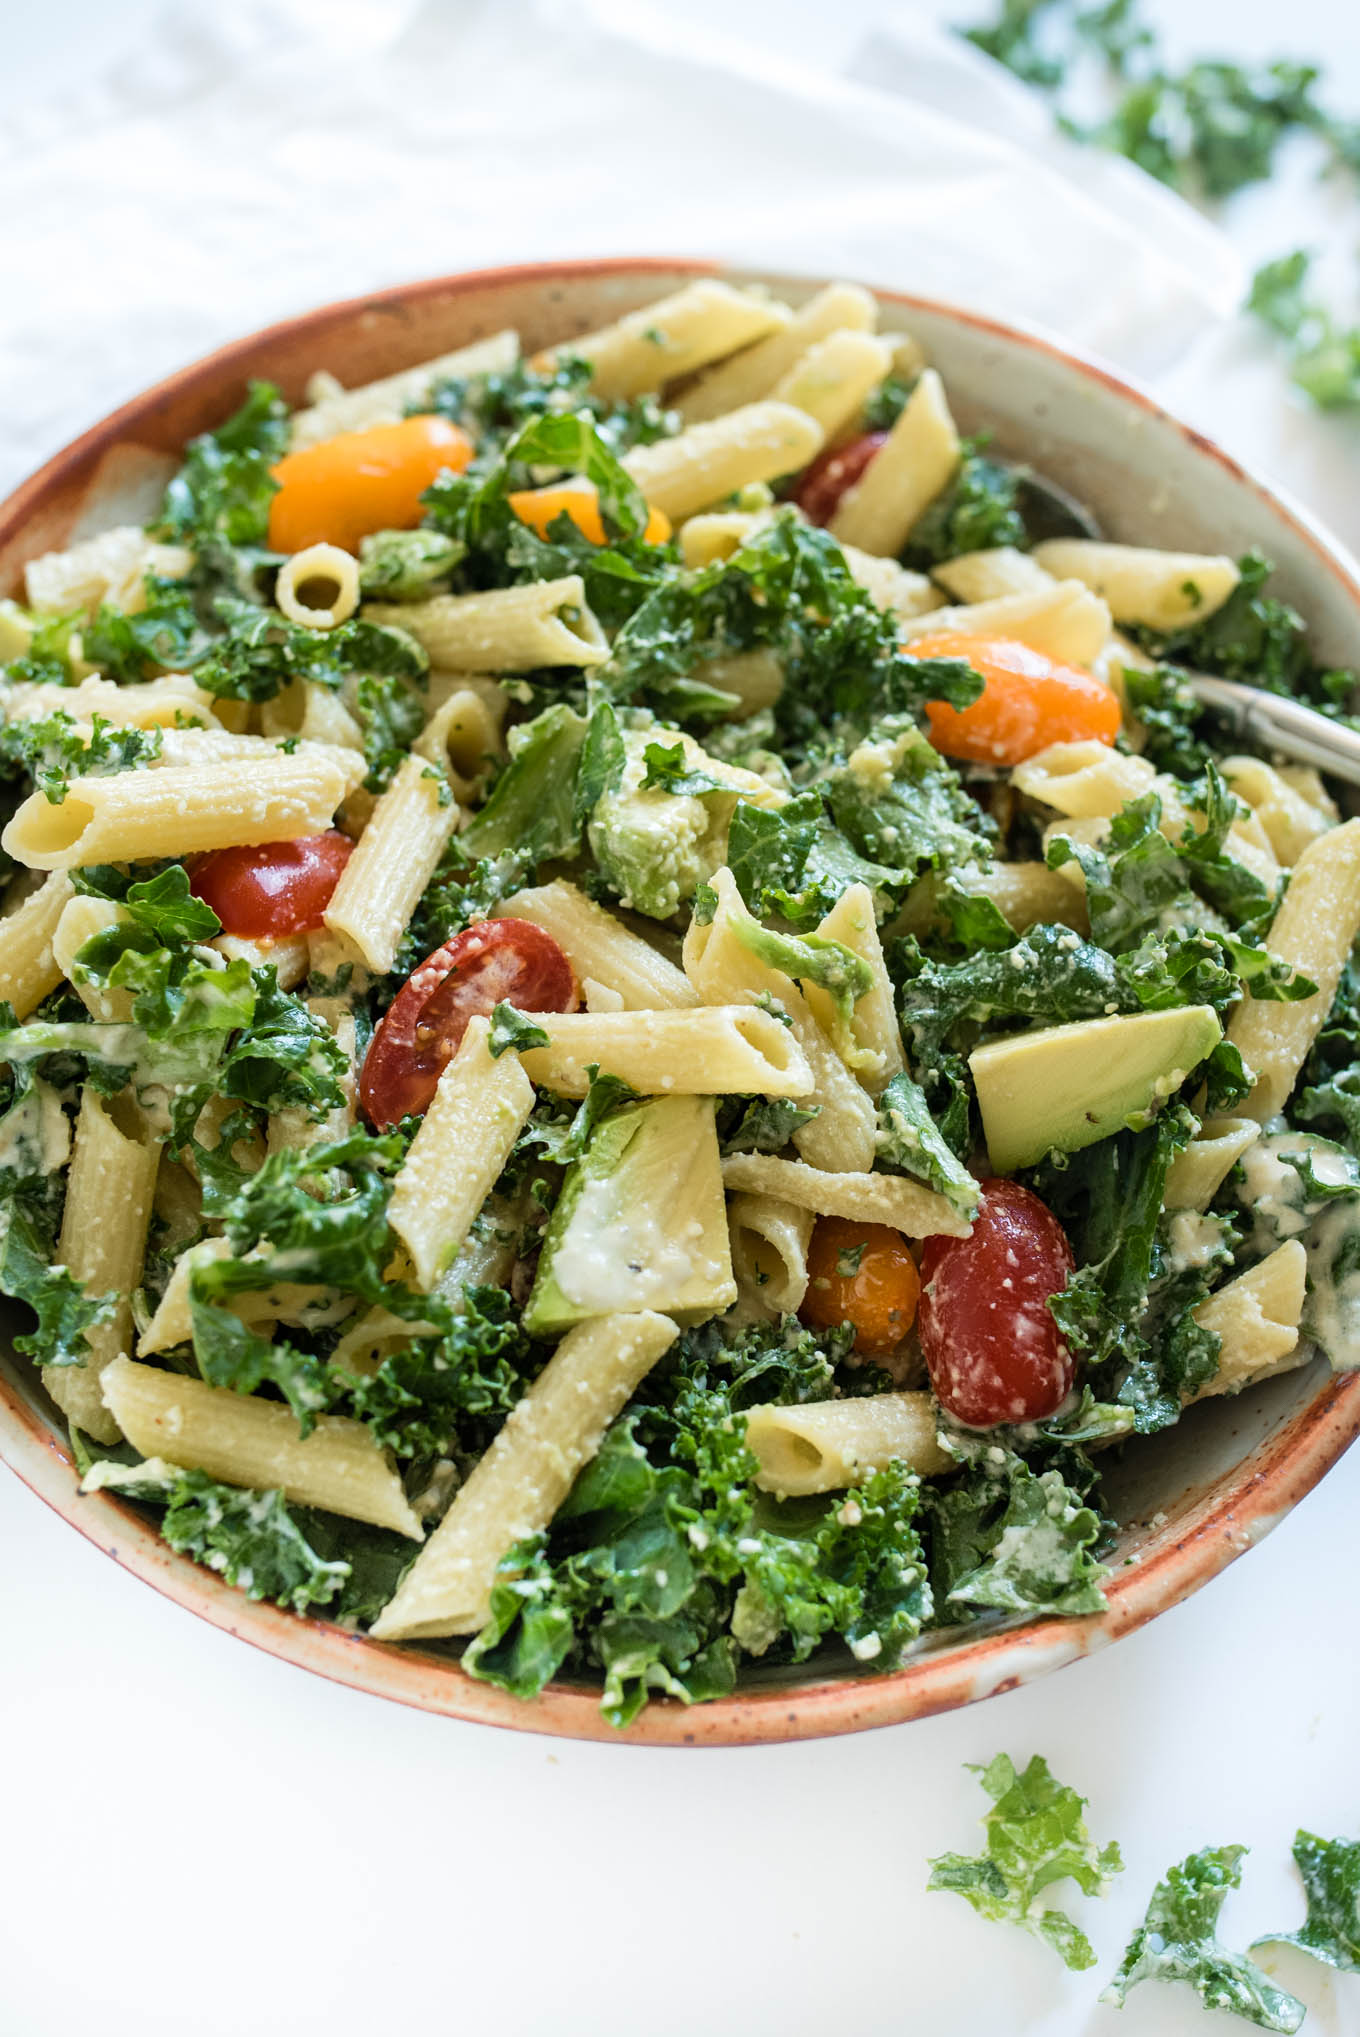 Kale Caesar Pasta Salad is a great vegetarian pasta salad packed with kale, avocado and a simple homemade Caesar dressing. 